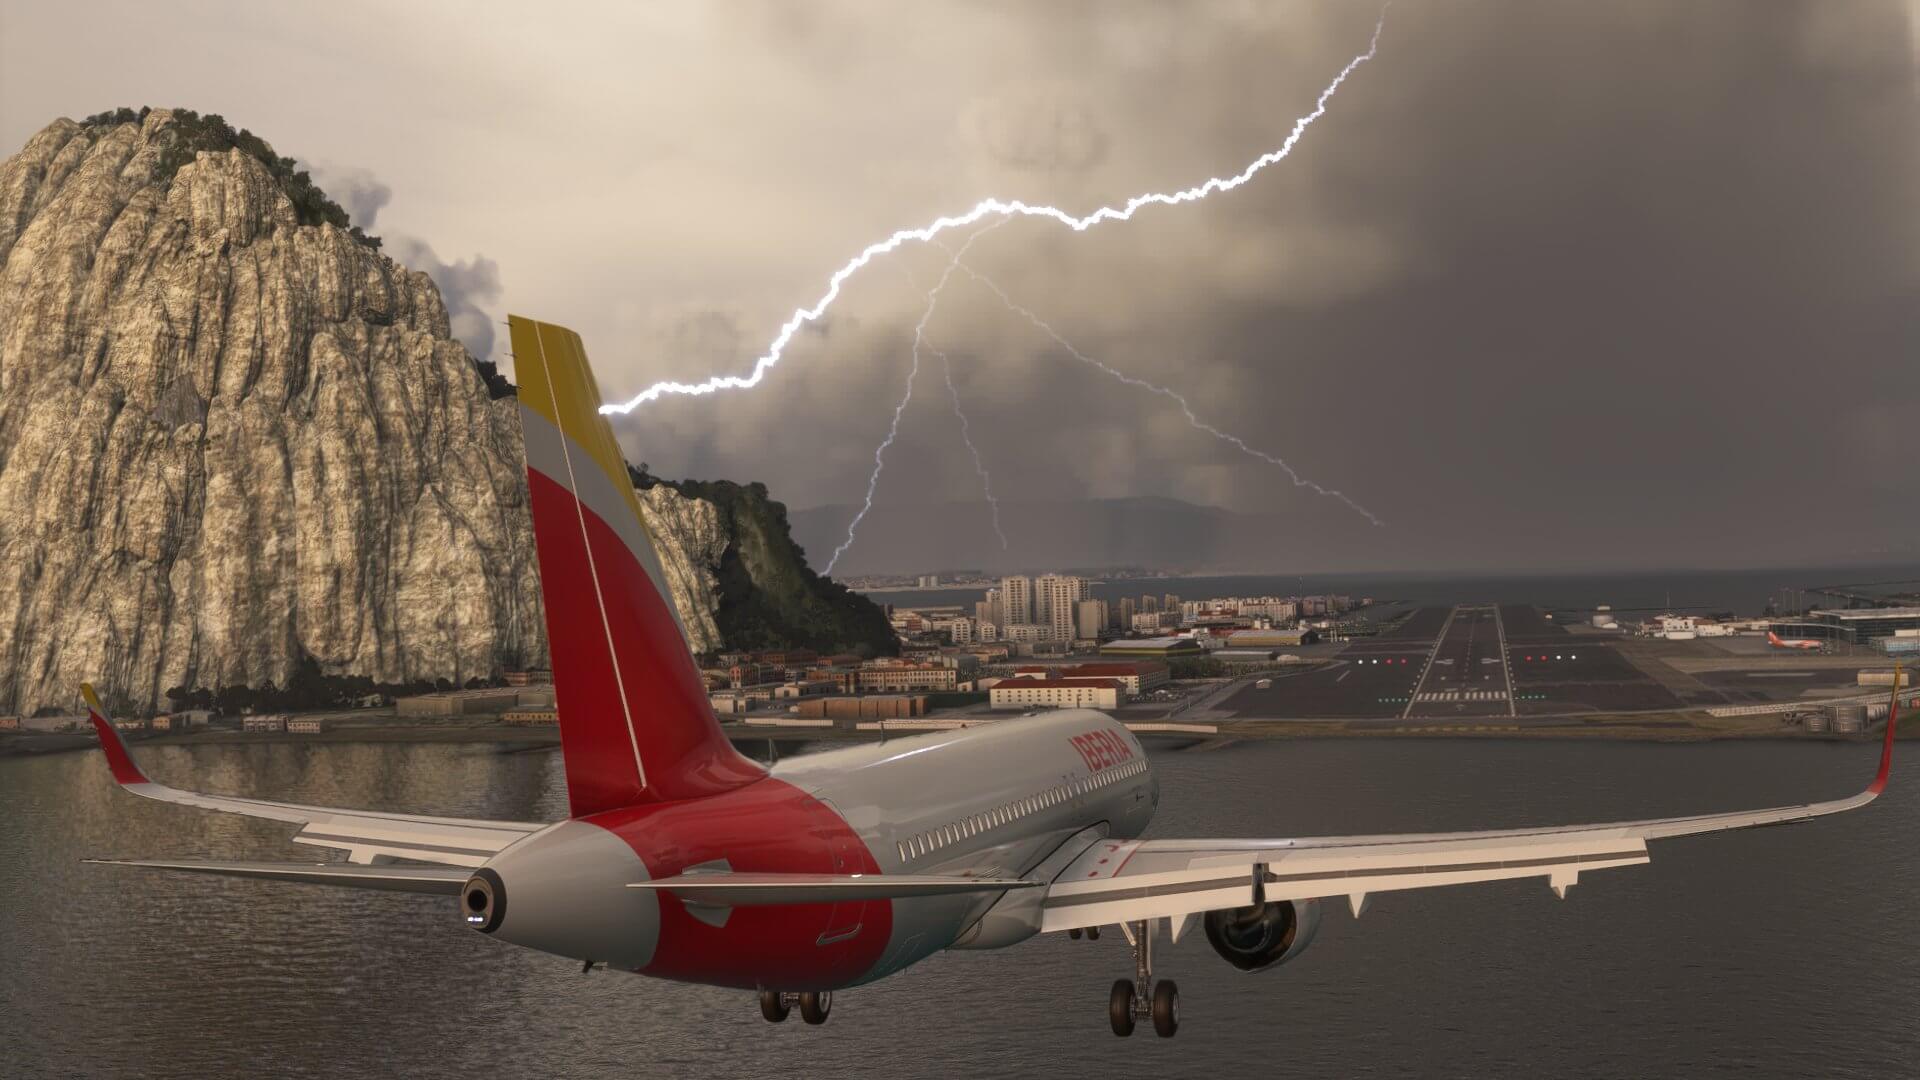 An Iberia Airbus A320 NEO on final approach for runway 09 at Gibraltar, with a lightning strike up ahead.